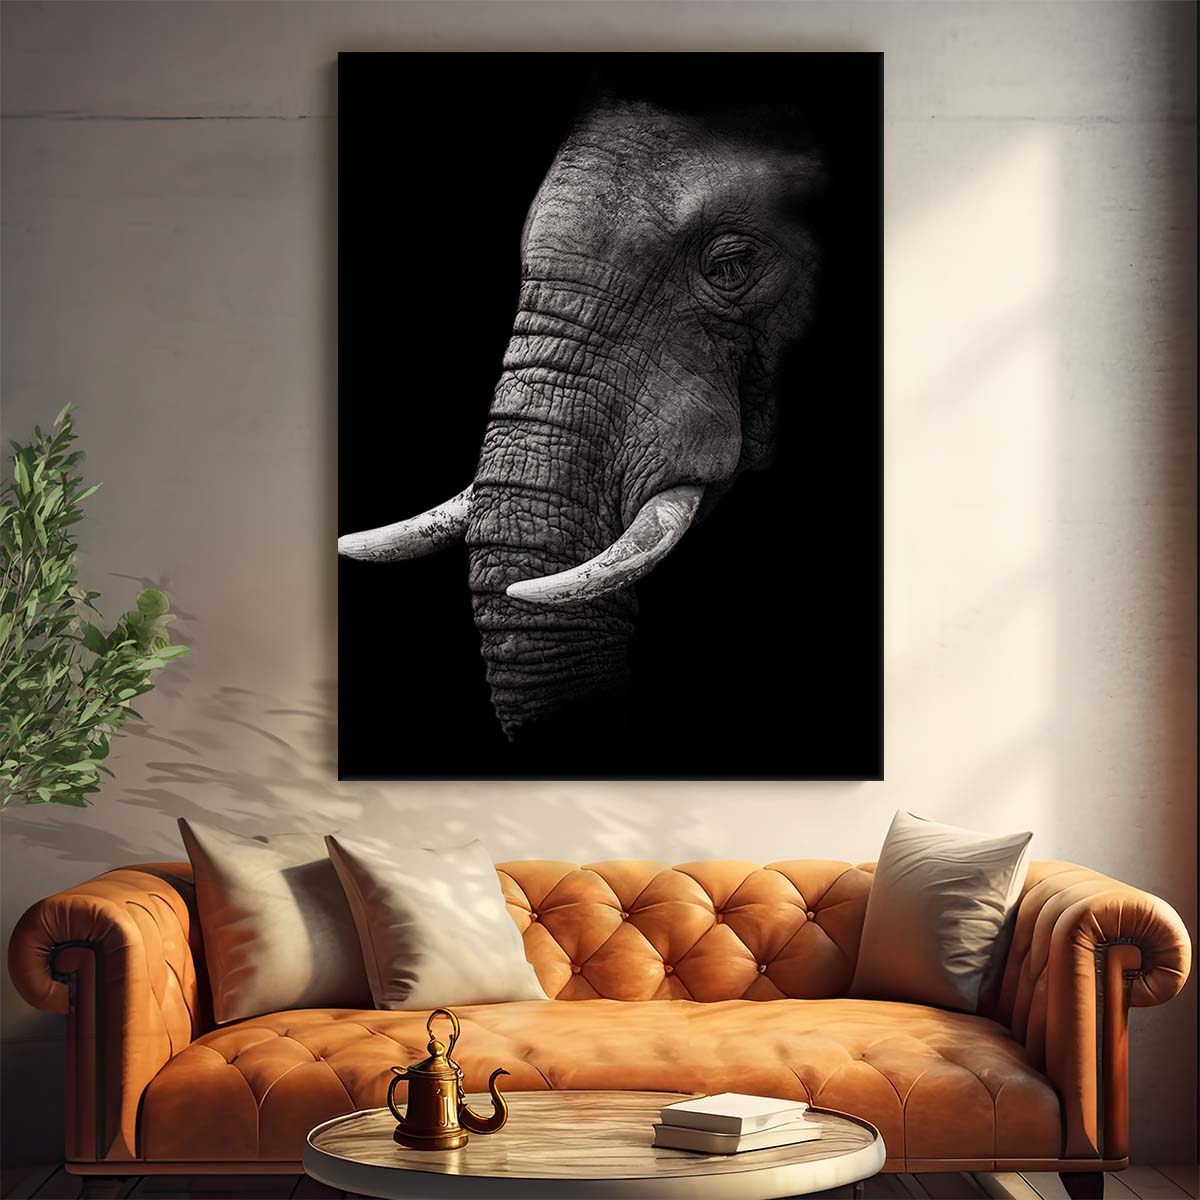 Monochrome African Elephant Photography Wrinkled, Emotional, by Luxuriance Designs, made in USA